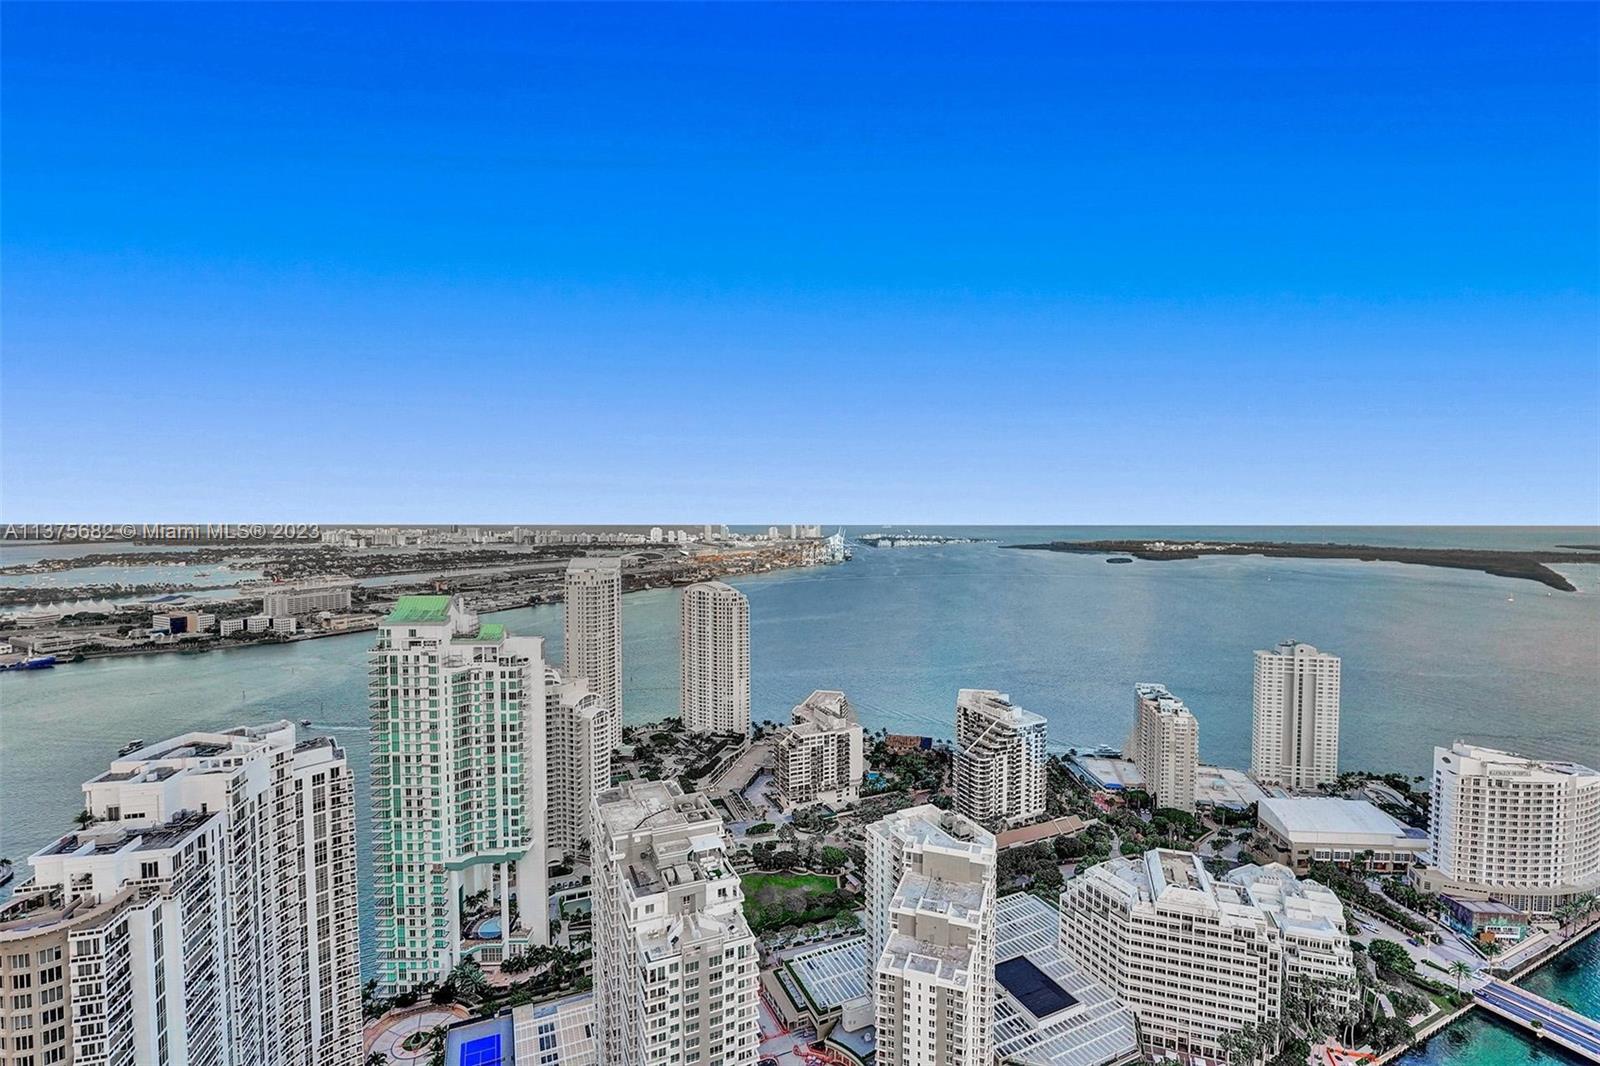 Largest unit in the very popular "Icon Brickell", over 3,600 sq ft including the terrace.  Unit has Spectacular Water Views that will never be taken away in the future, facing Biscayne Bay & the Atlantic Ocean.  Huge unique bonus of a Private, approx. 1,000 sq ft, outdoor terrace.  The terrace is surrounded by 30ft+ high Hurricane Impact Glass which permits you to keep peace of mind during large gatherings or children playing outside unattended.  Unit itself has some upgrades which include Marble floors throughout, lighting upgrades & closet build outs. One of the 4 Bedrooms has been opened up to create a larger living room space, now making the unit 3 Bedroom and a den.  
Icon Brickell is in the heart of the City, but right on the water.  Condo has some of the best amenities around town.